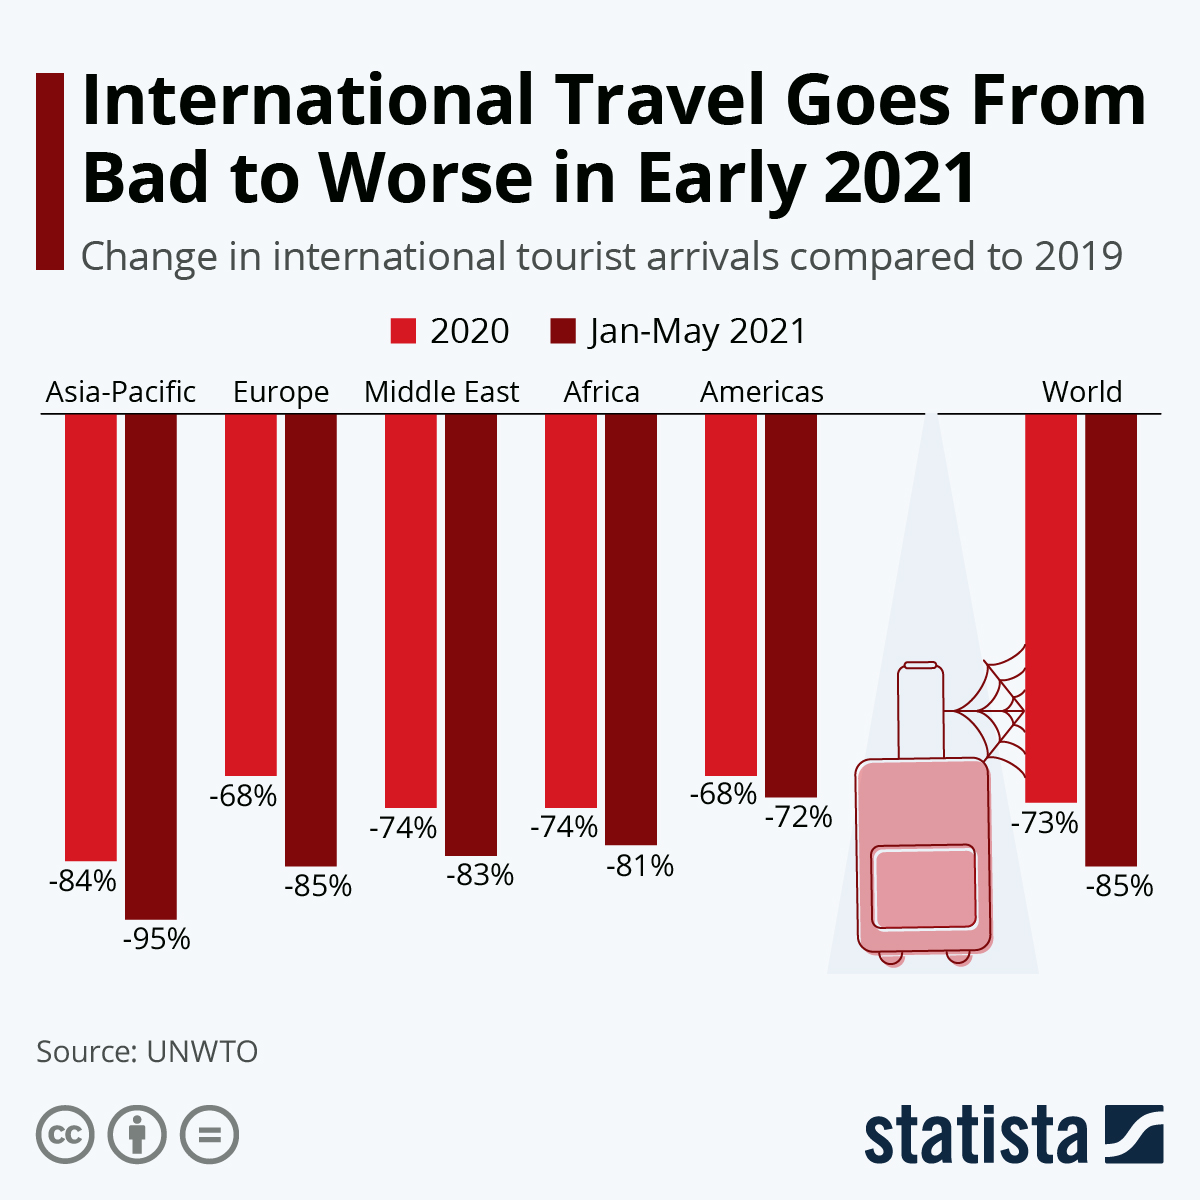 International Travel Goes From Bad to Worse in Early 2021